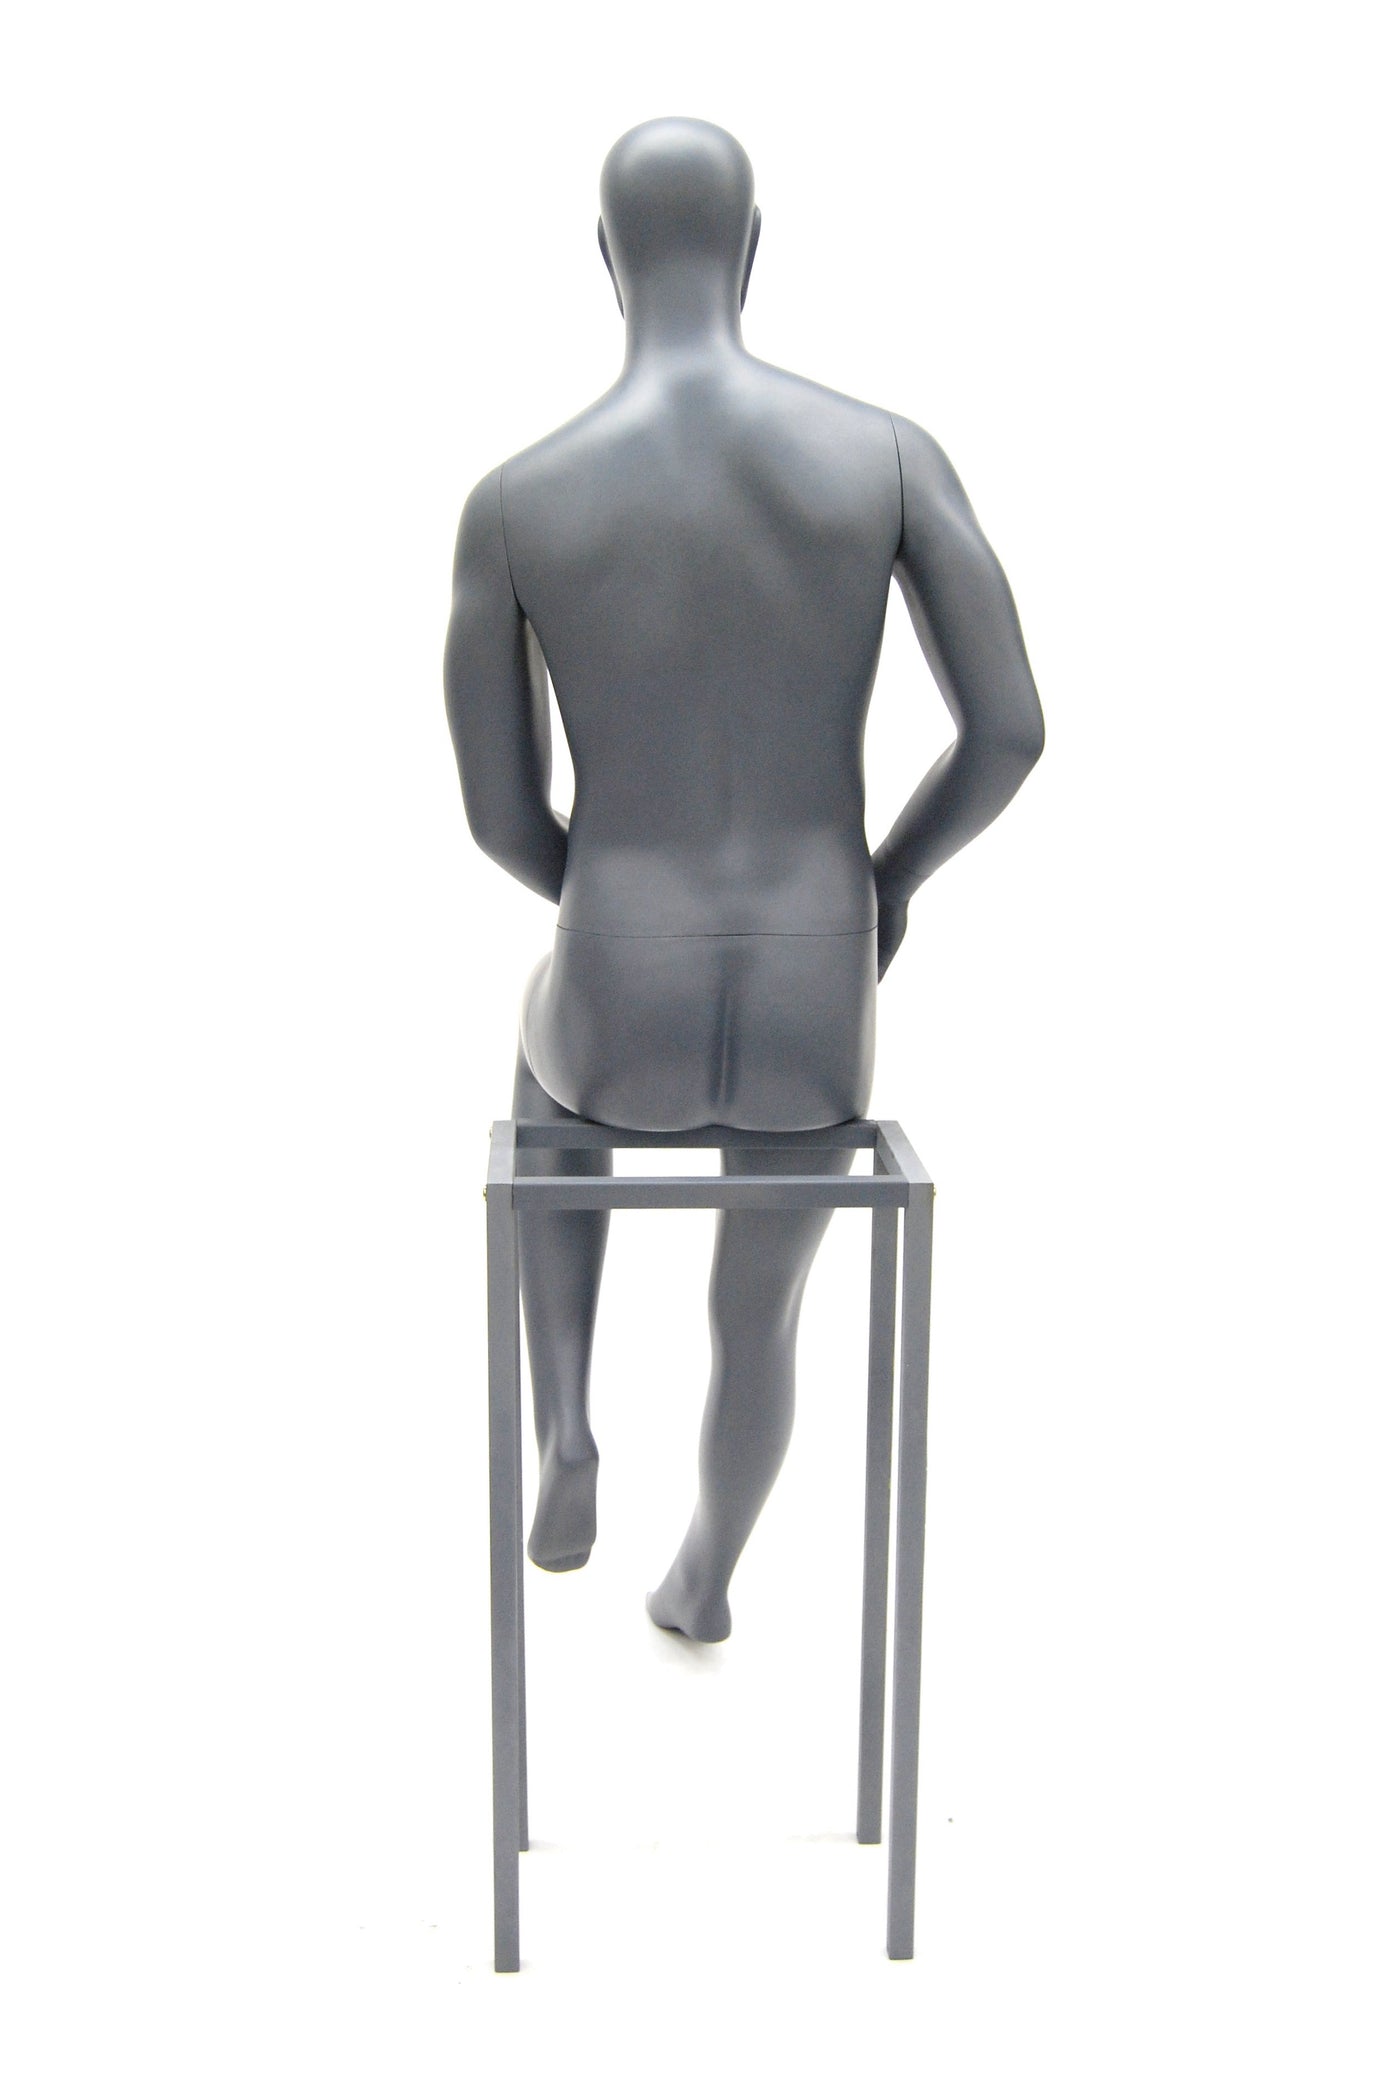 Egghead Male Mannequin in Sitting Pose: Grey